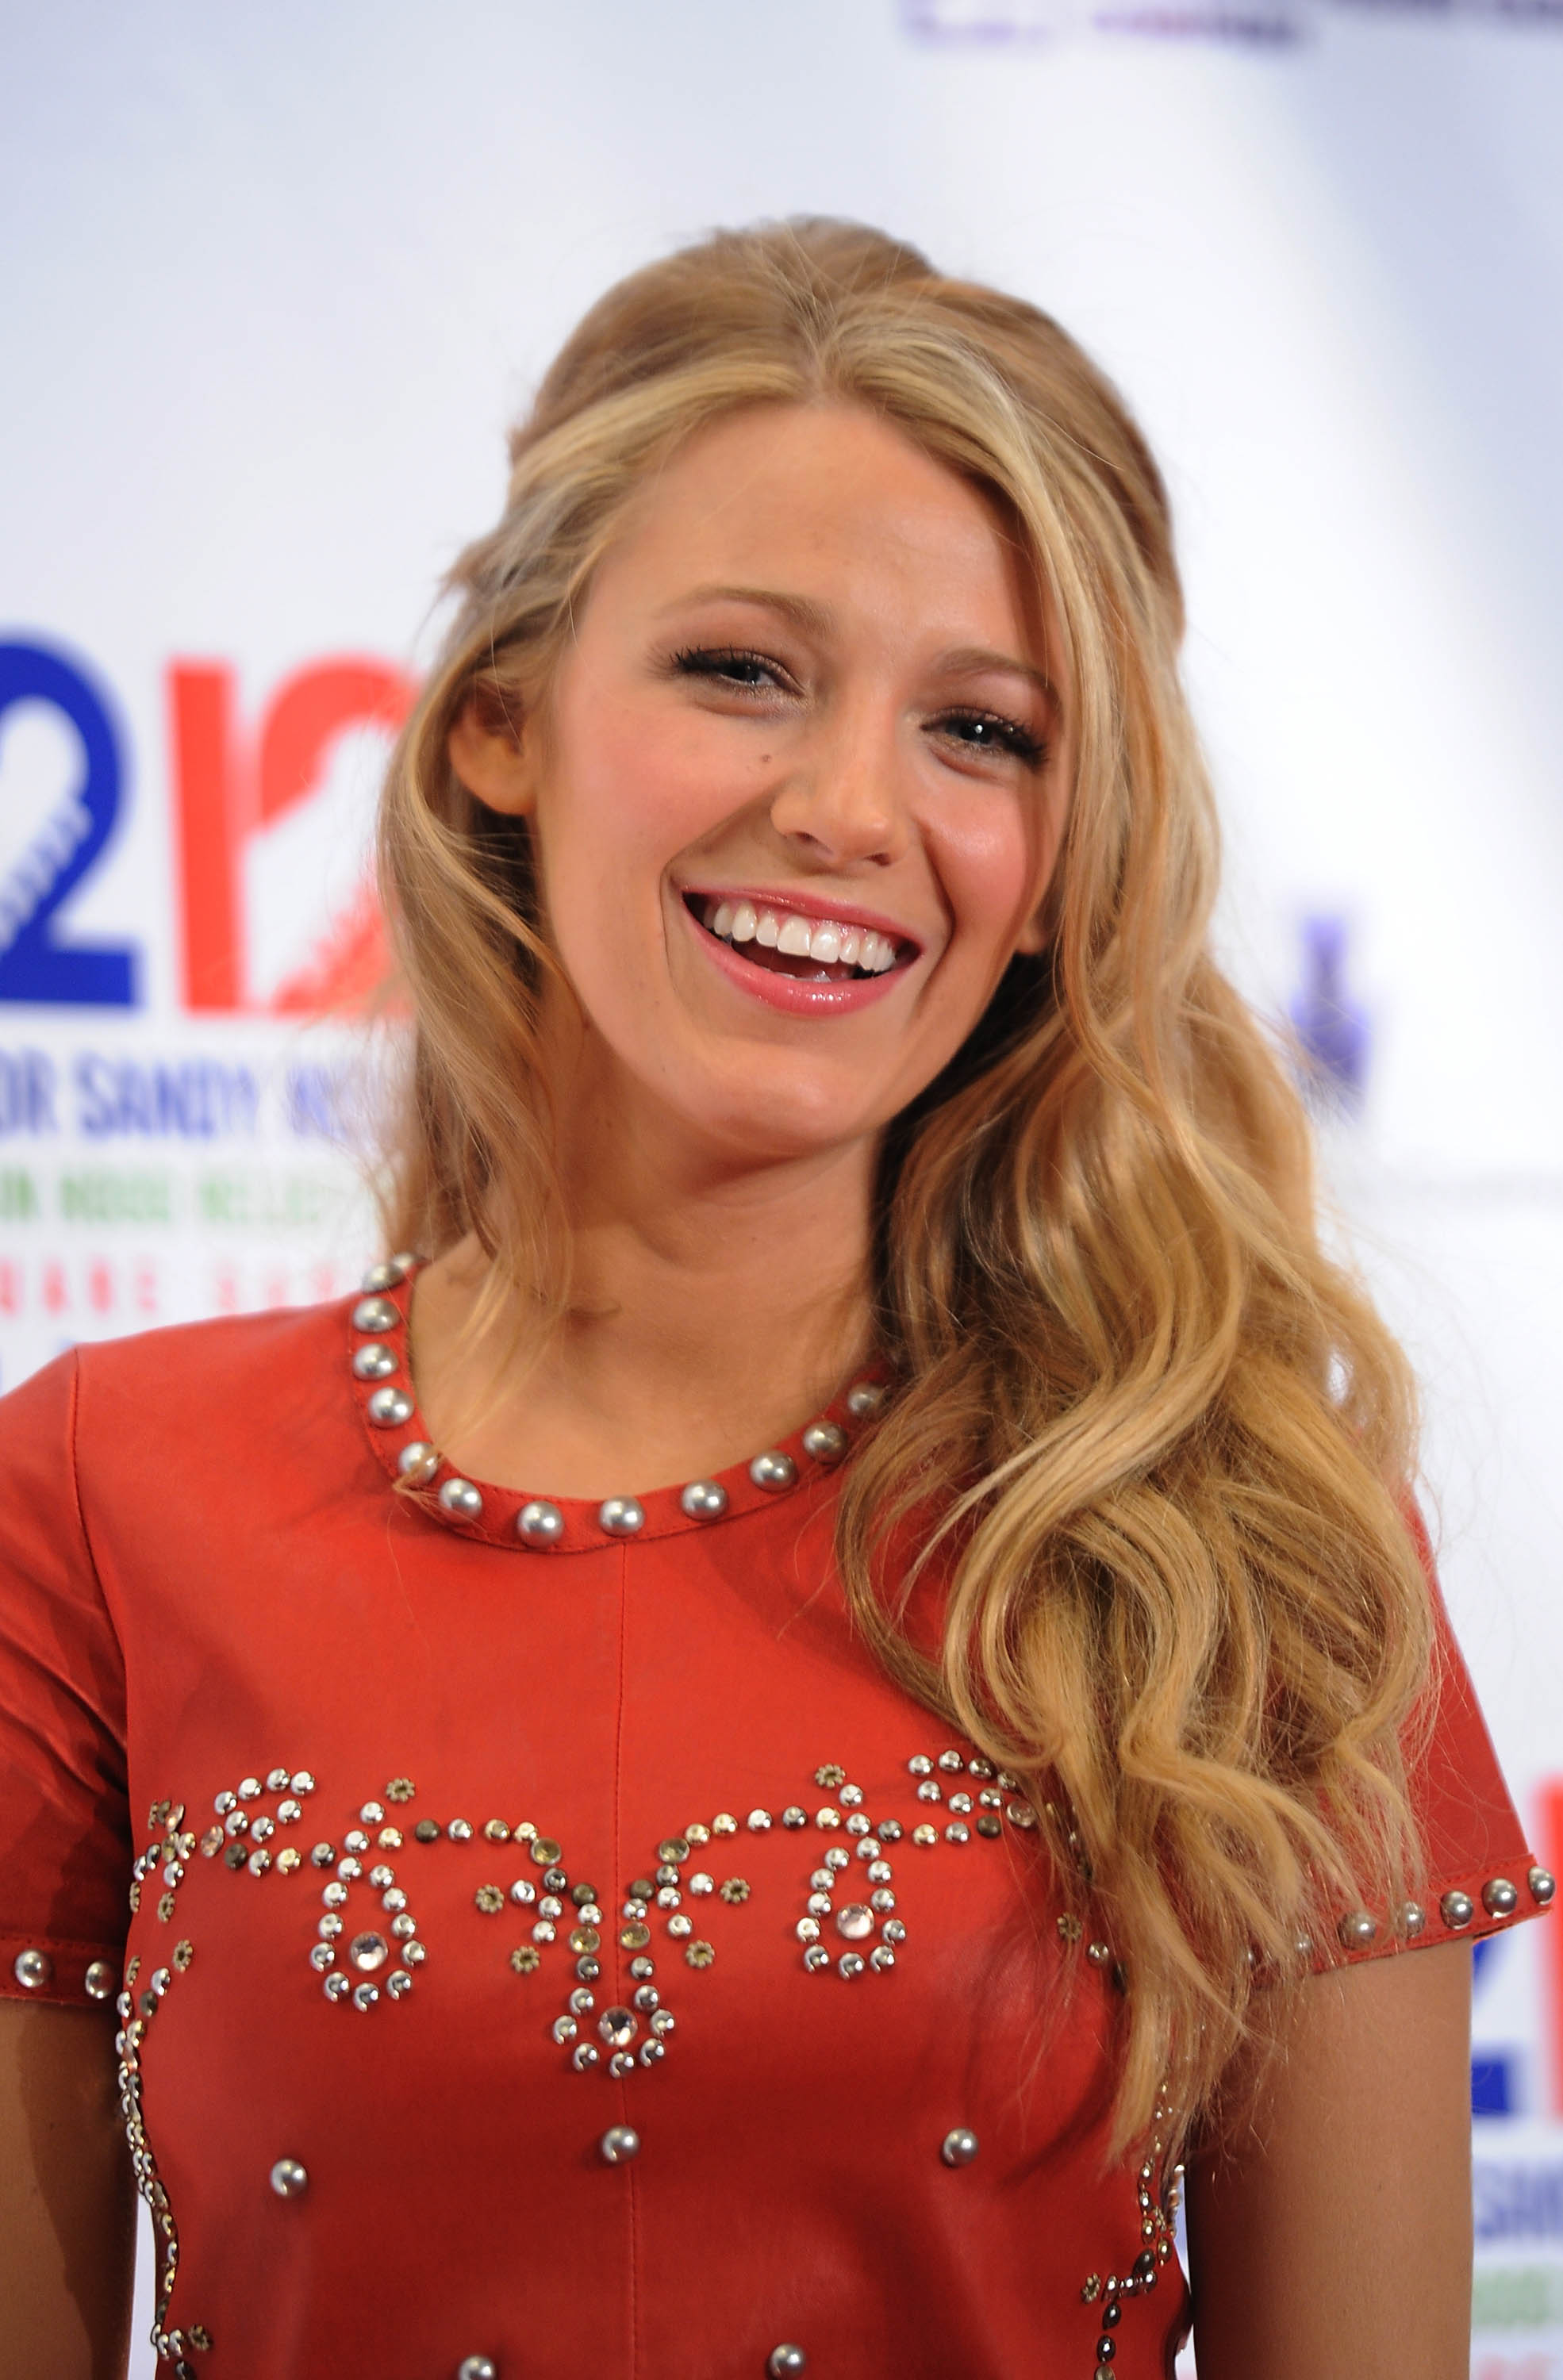 Blake Lively attends "12-12-12" a concert benefiting The Robin Hood Relief Fund to aid the victims of Hurricane Sandy presented by Clear Channel Media Entertainment, The Madison Square Garden Company and The Weinstein Company at Madison Square Garden on December 12, 2012 in New York City.